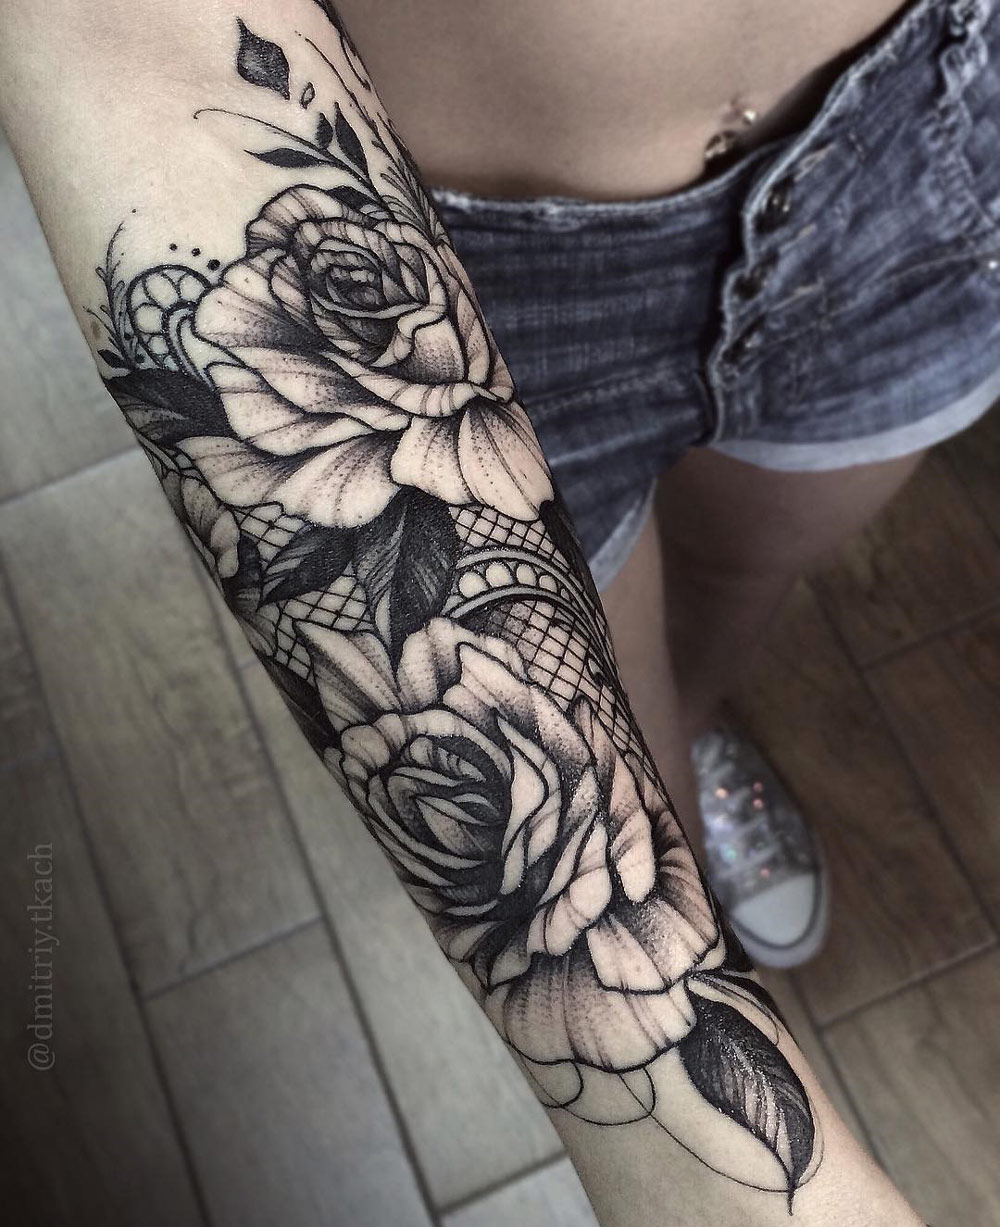 Roses & Lace Tattoo